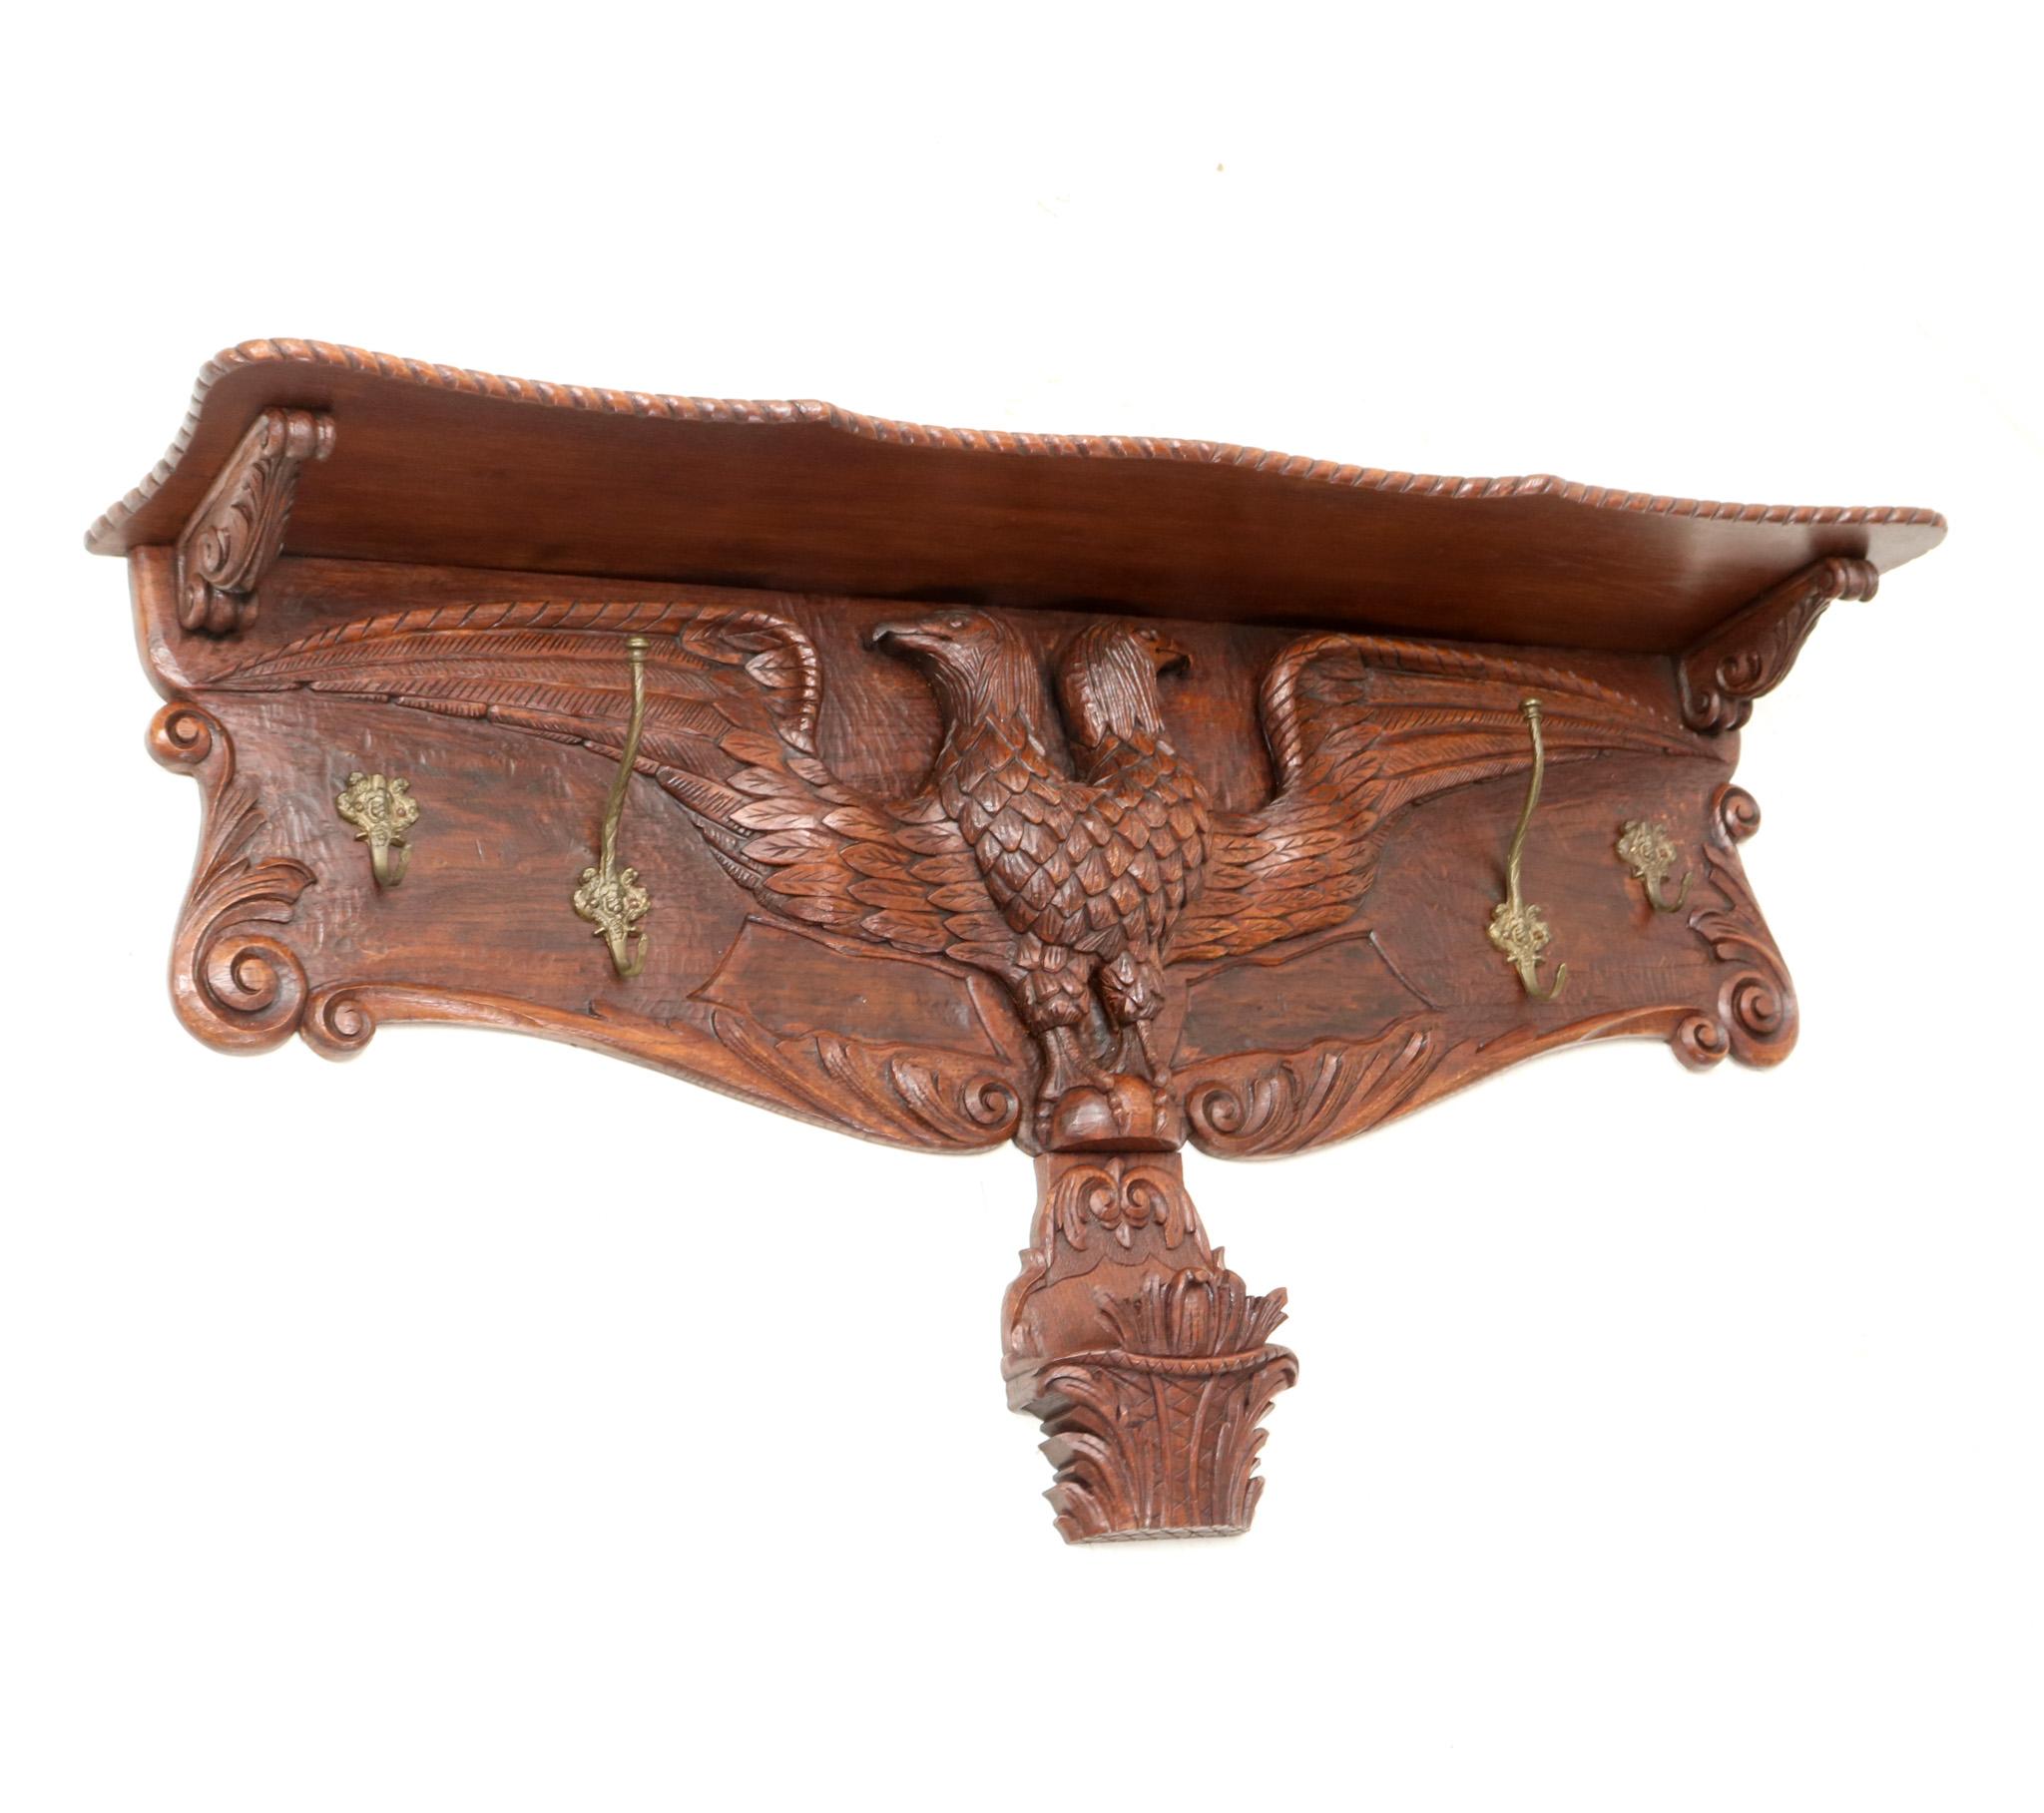 Magnificent and ultra rare Black Forest style wall coat rack.
Striking European design from the 1900s.
Solid oak frame with a hand-carved sculptured double-headed eagle.
Four patinated brass decorative hooks.
This wonderful Black Forest style